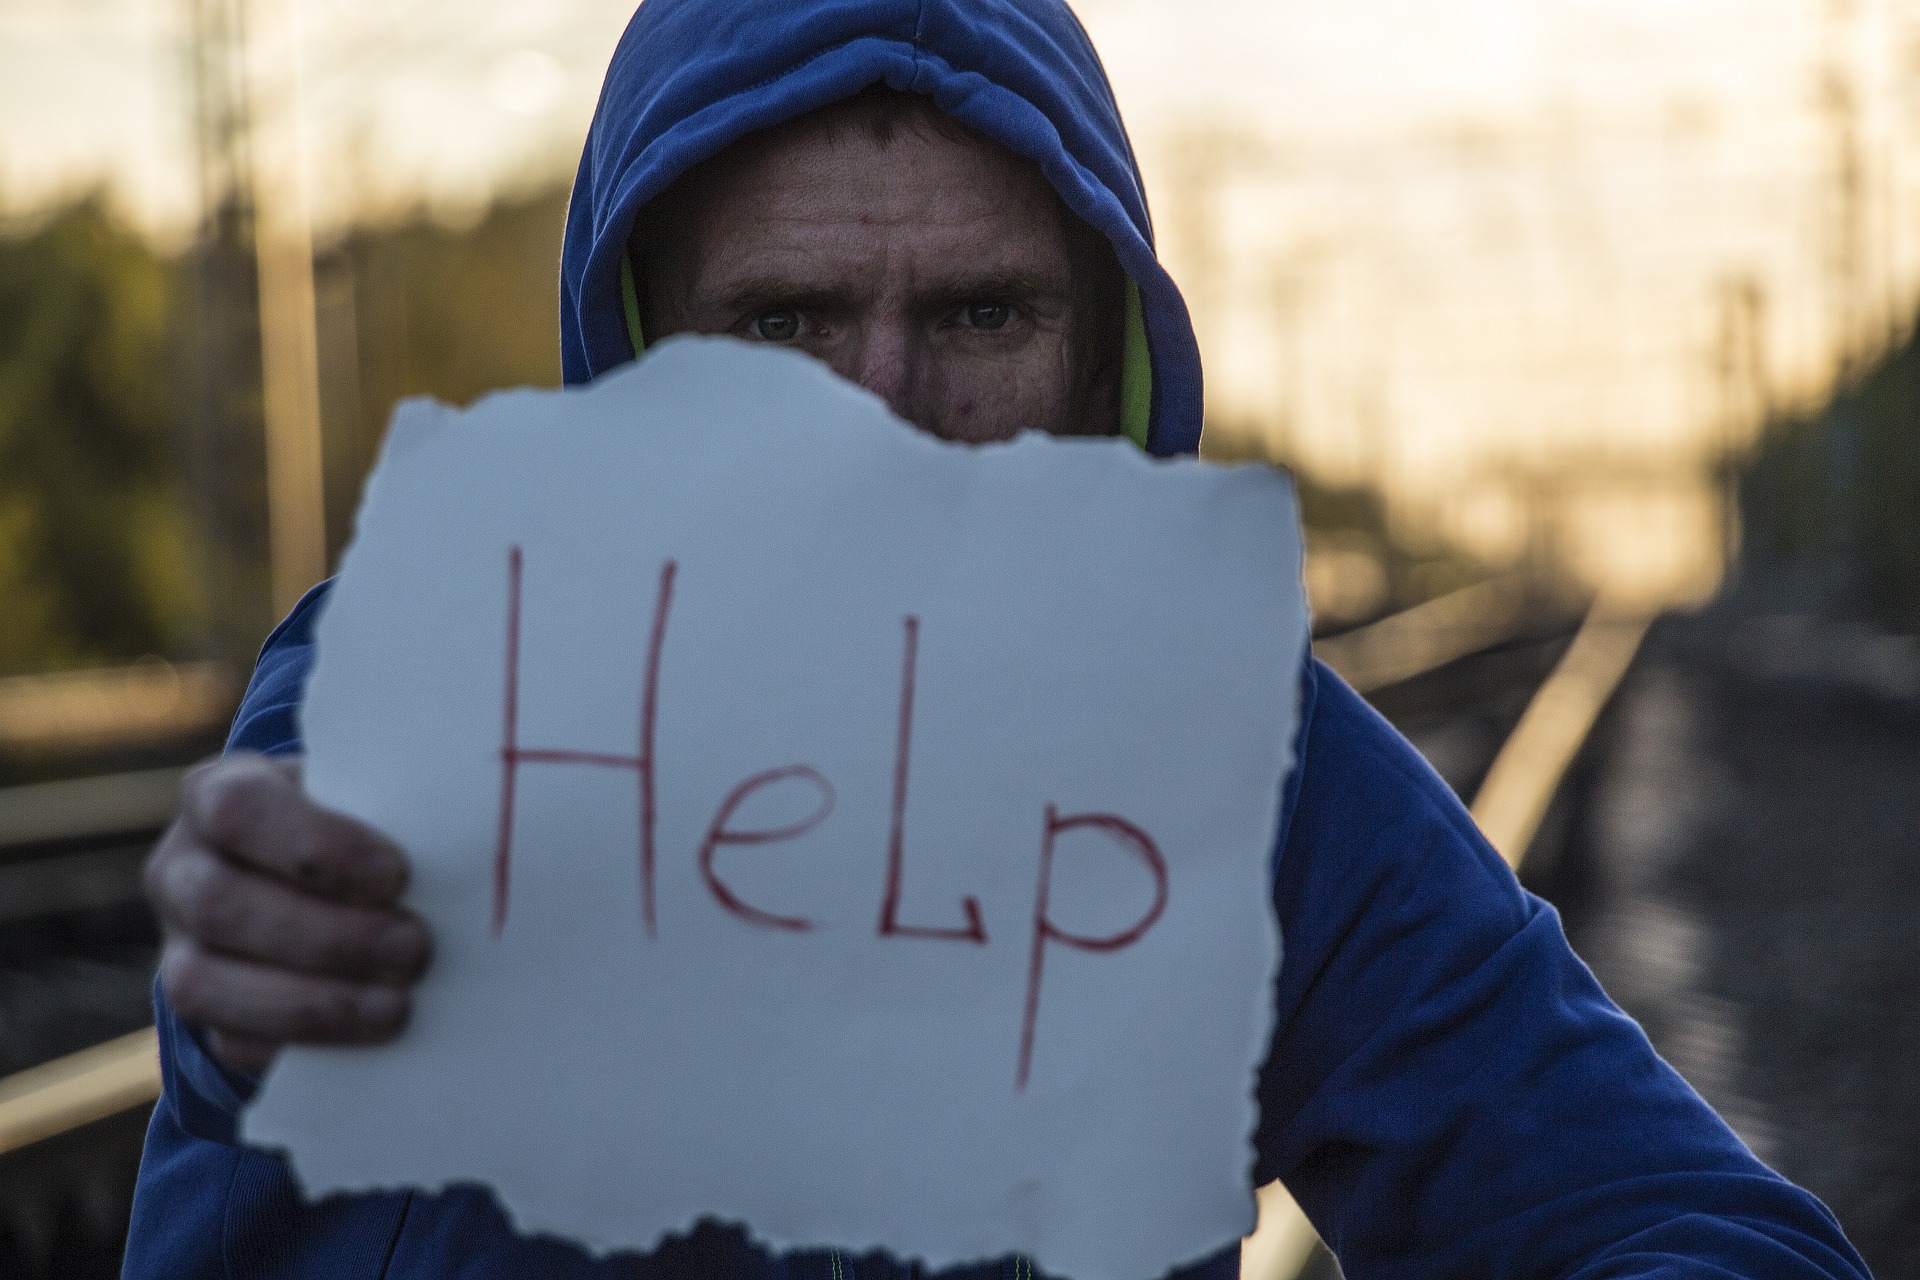 A man asking for help